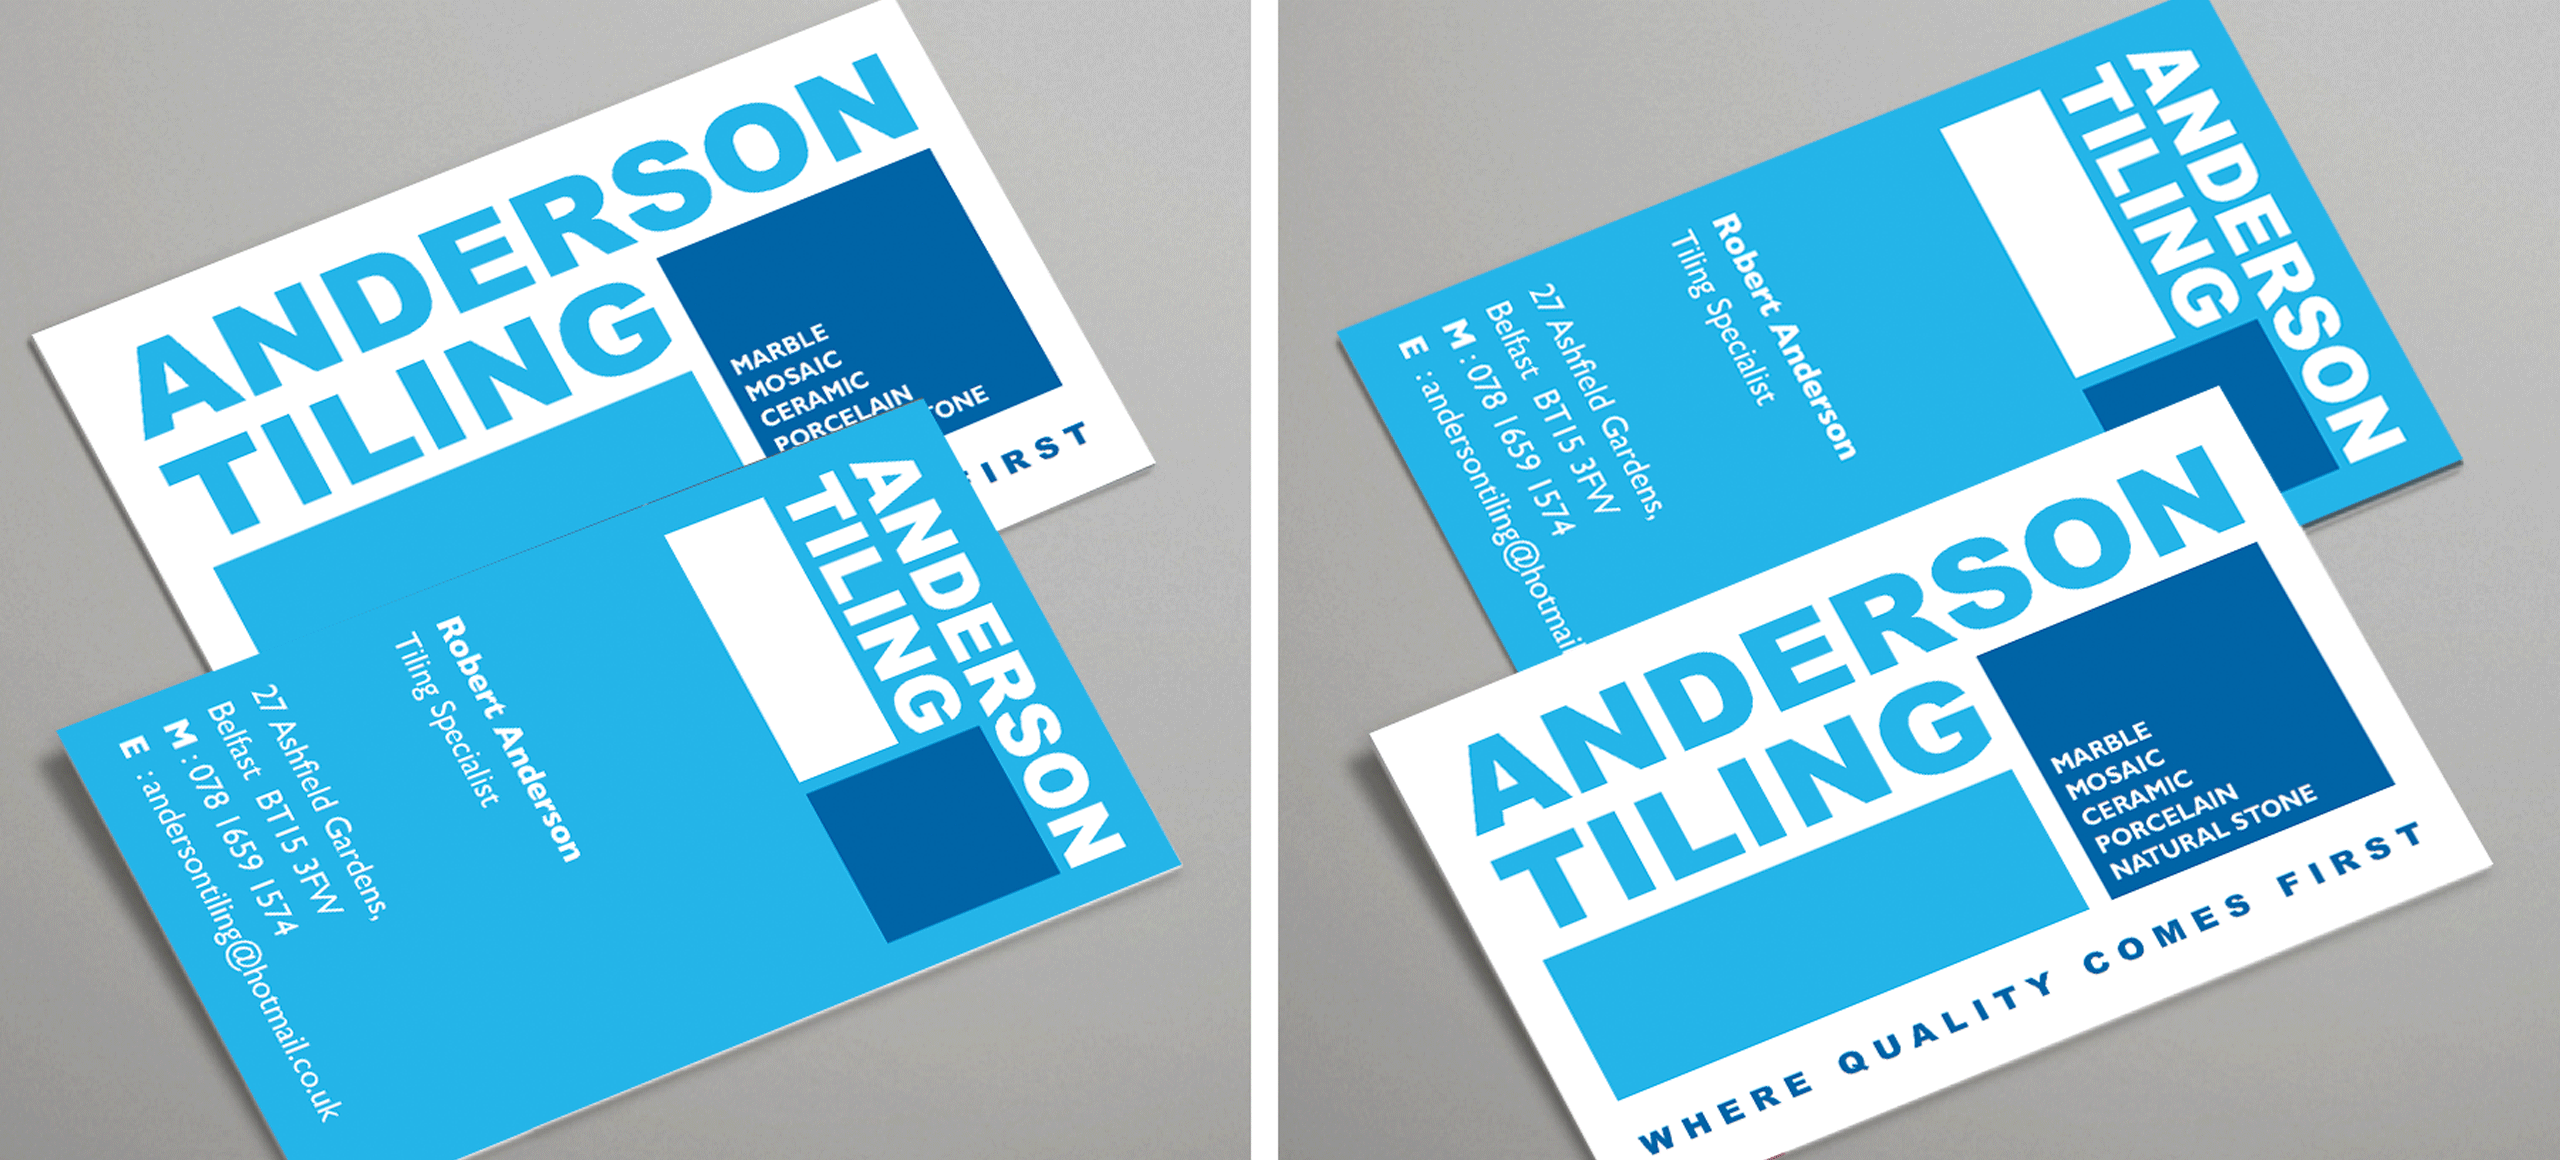 Anderson Tiling business cards